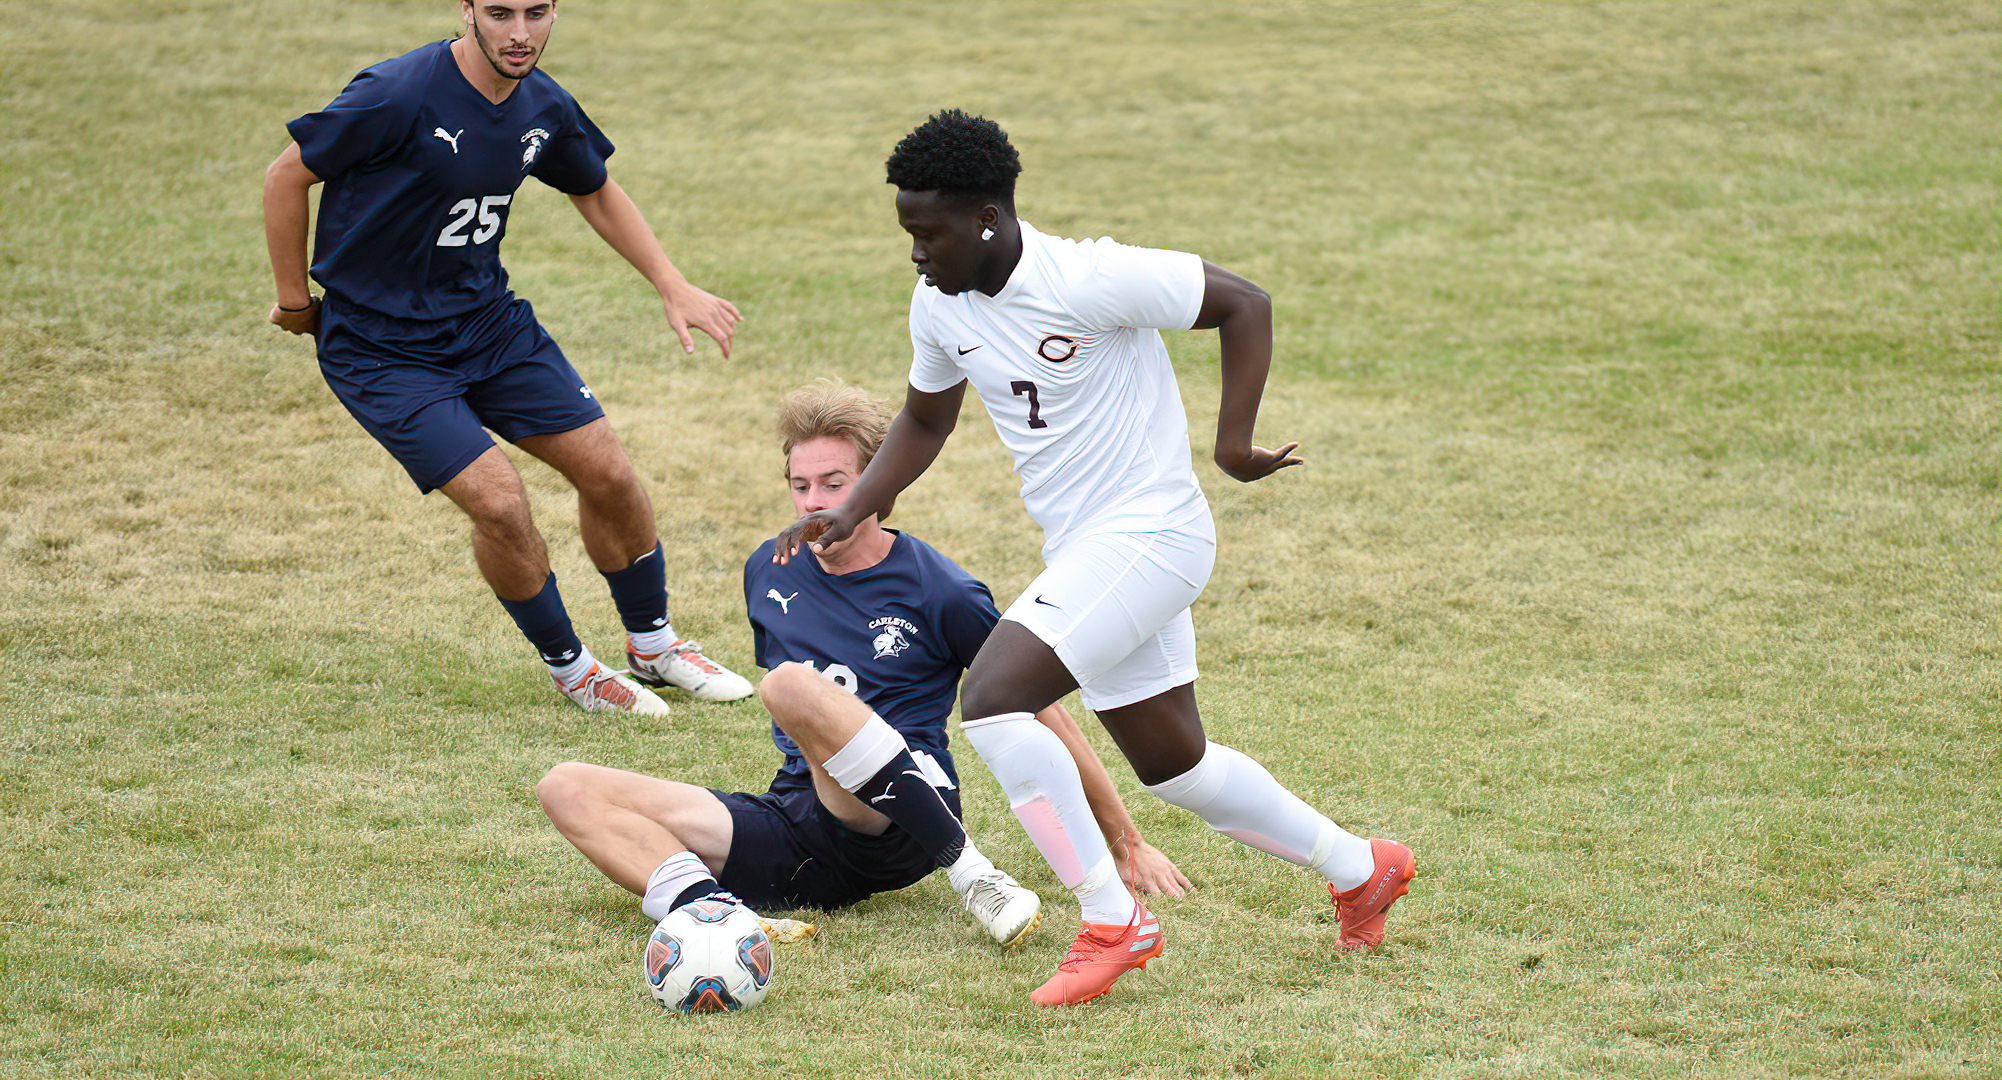 Cobber sophomore Tamba Ngolloe takes the ball away from a Carleton defender during the second half of CC's game with the Knights.